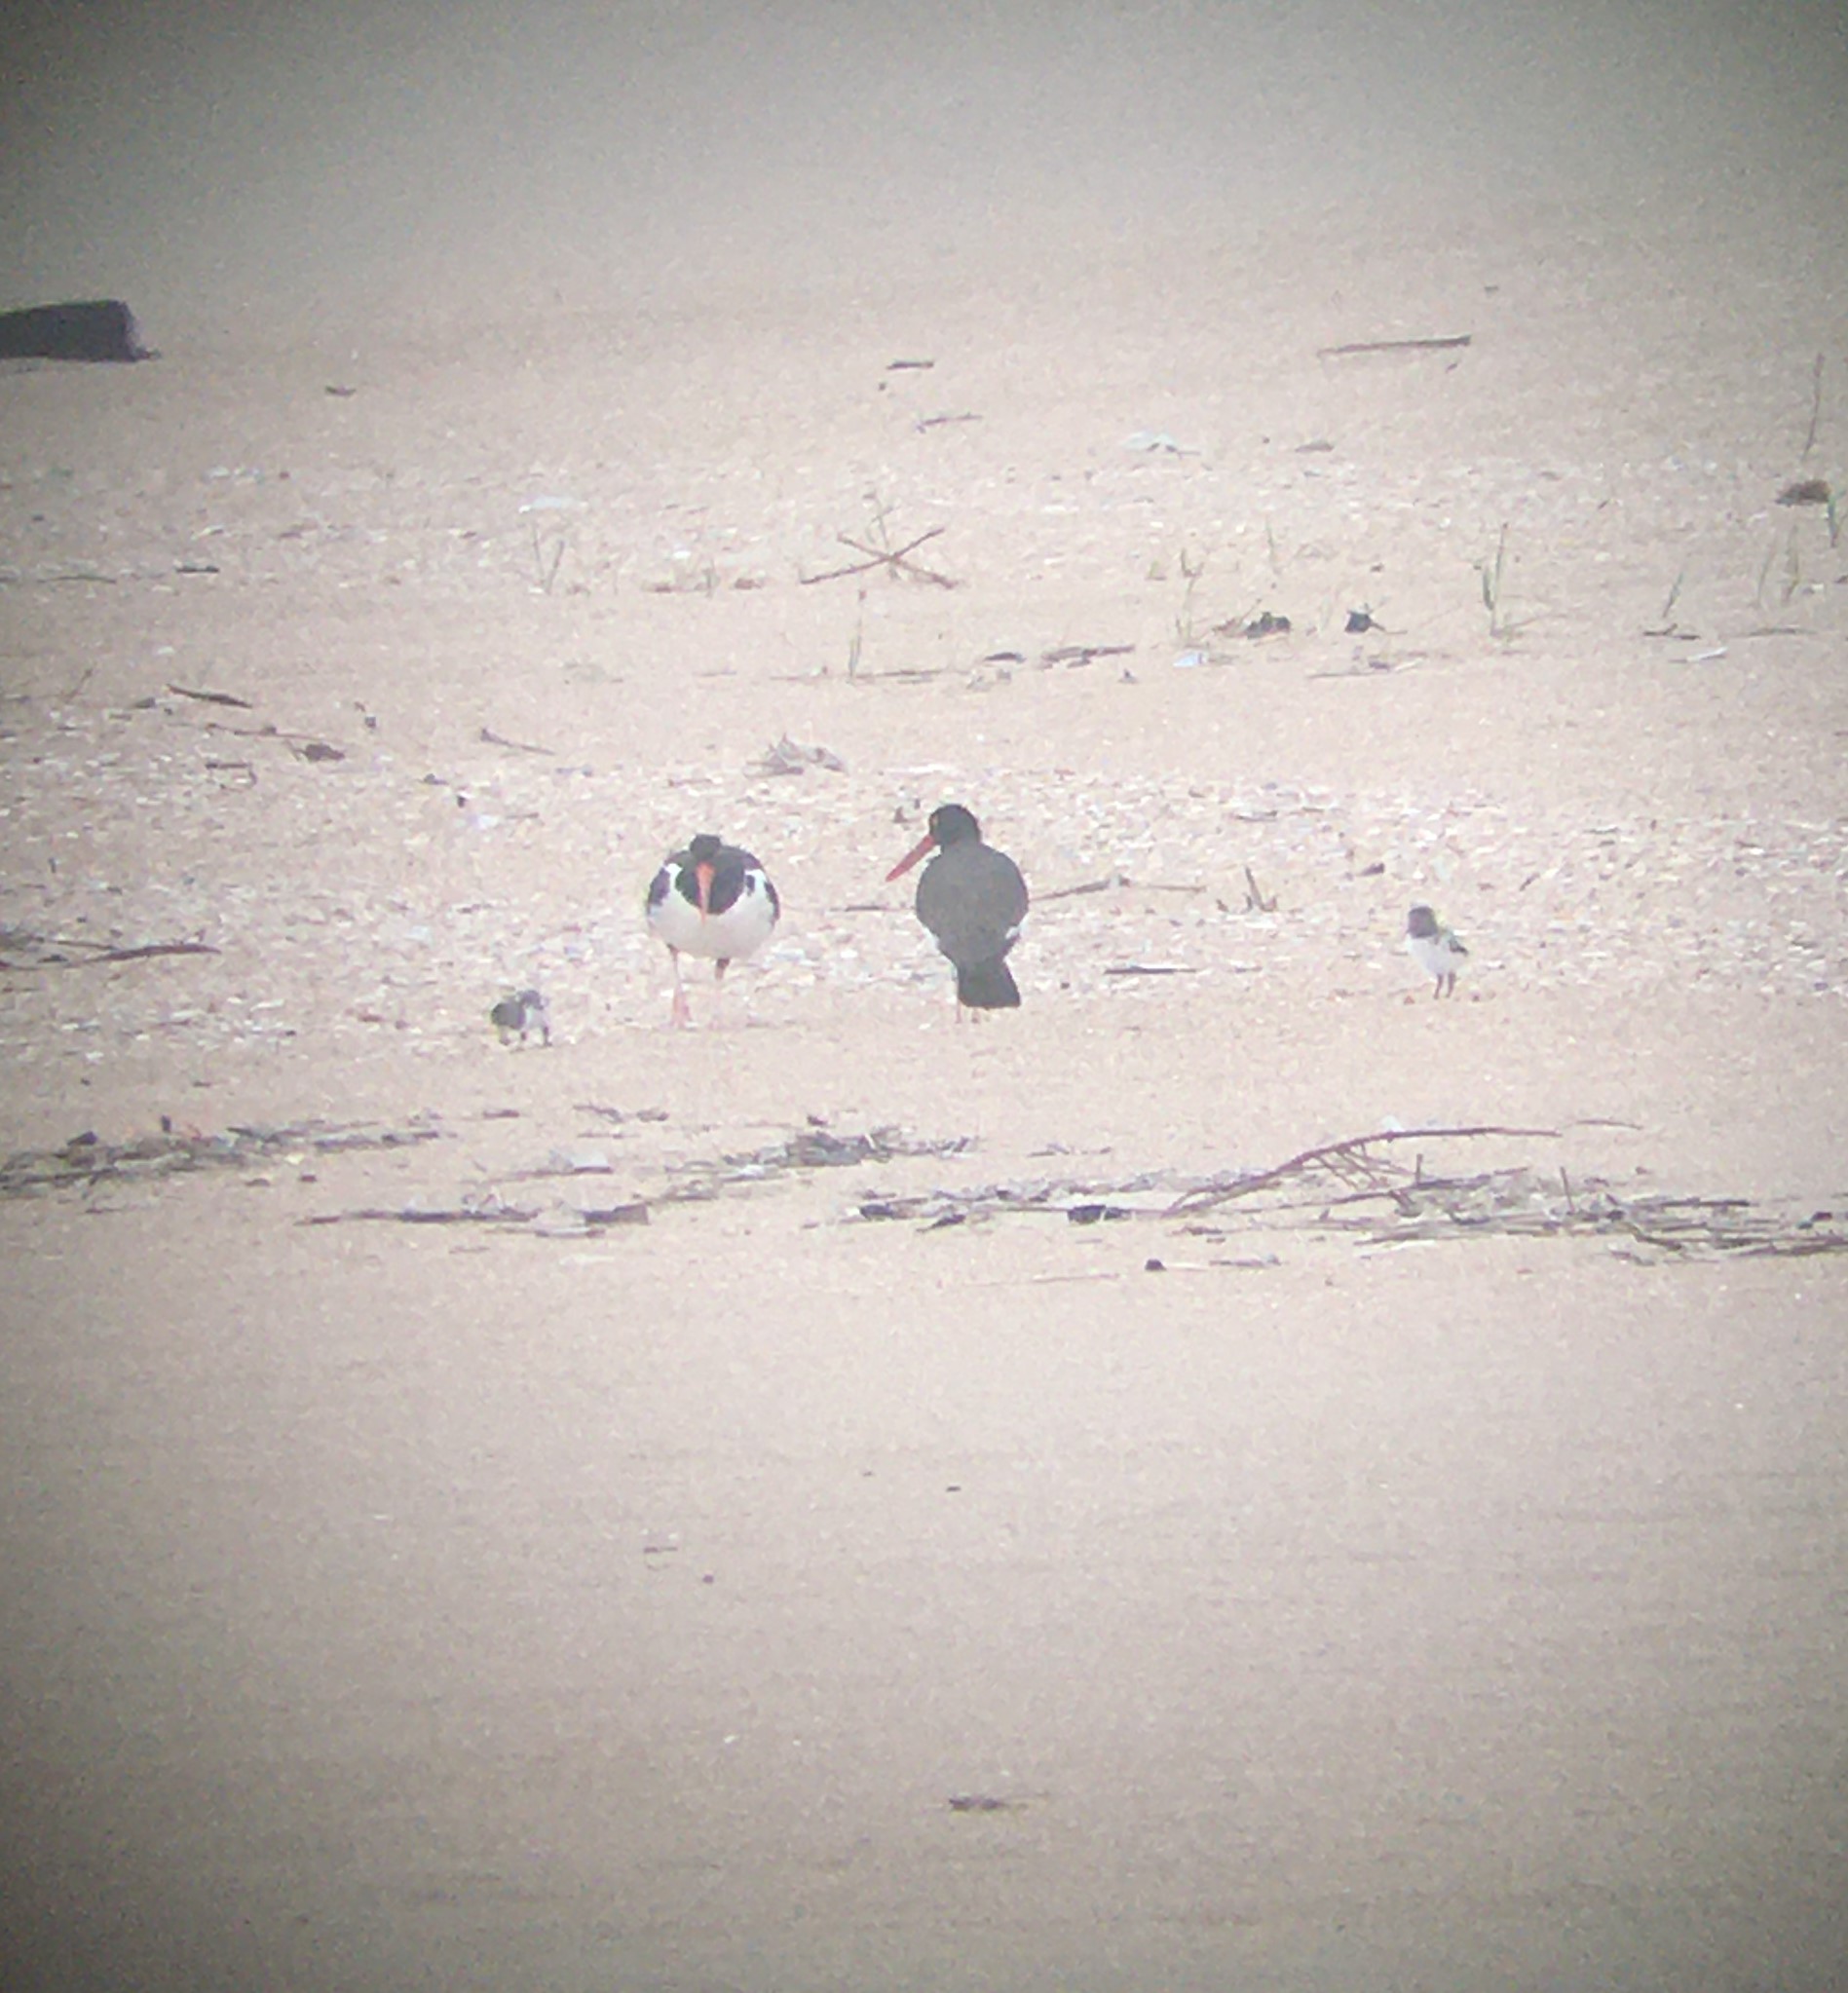 2 adult American oystercatchers with 2 chicks on the beach.